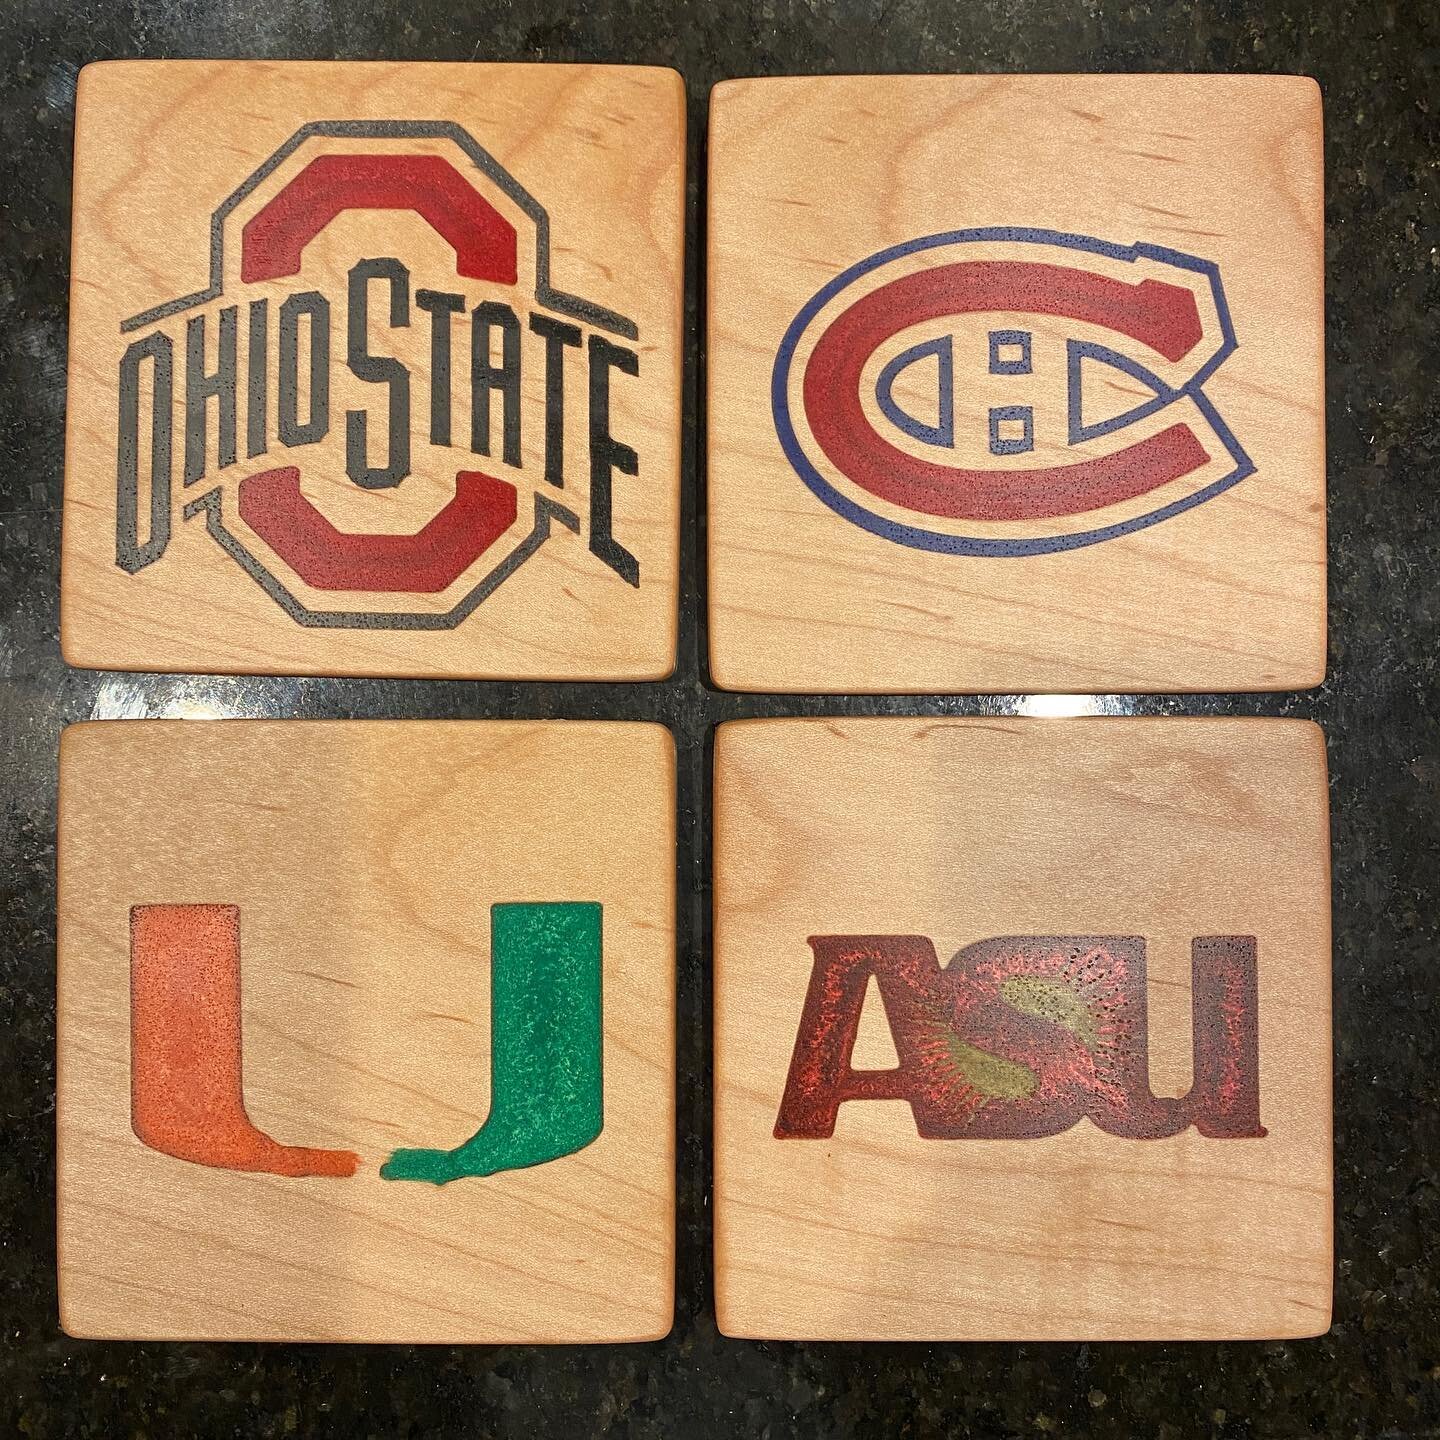 I'm going to visit my son in Alaska soon and wanted to bring some homemade gifts.  I thought coasters with their favorite teams would be great!

Special thank you to @turningbytim for helping me pick out the colors.  Go check out @turnerswarehouse fo